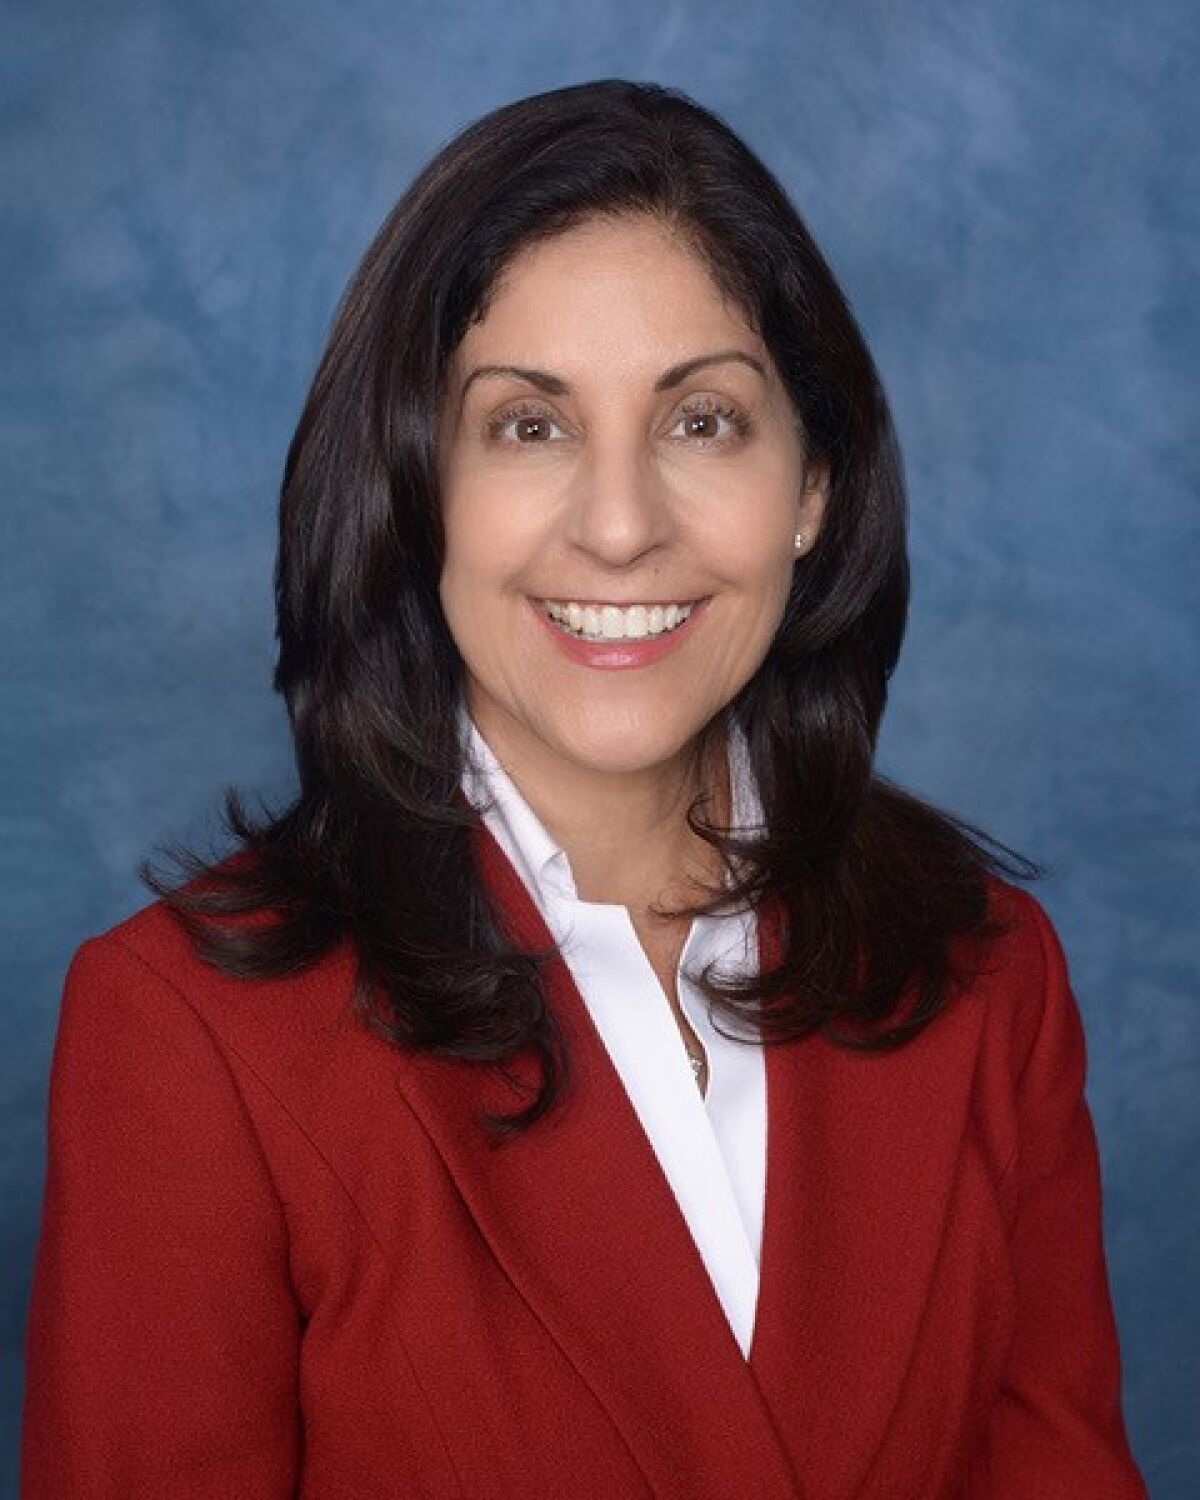 Sharon Spivak is new chair of the City of San Diego Ethics Commission